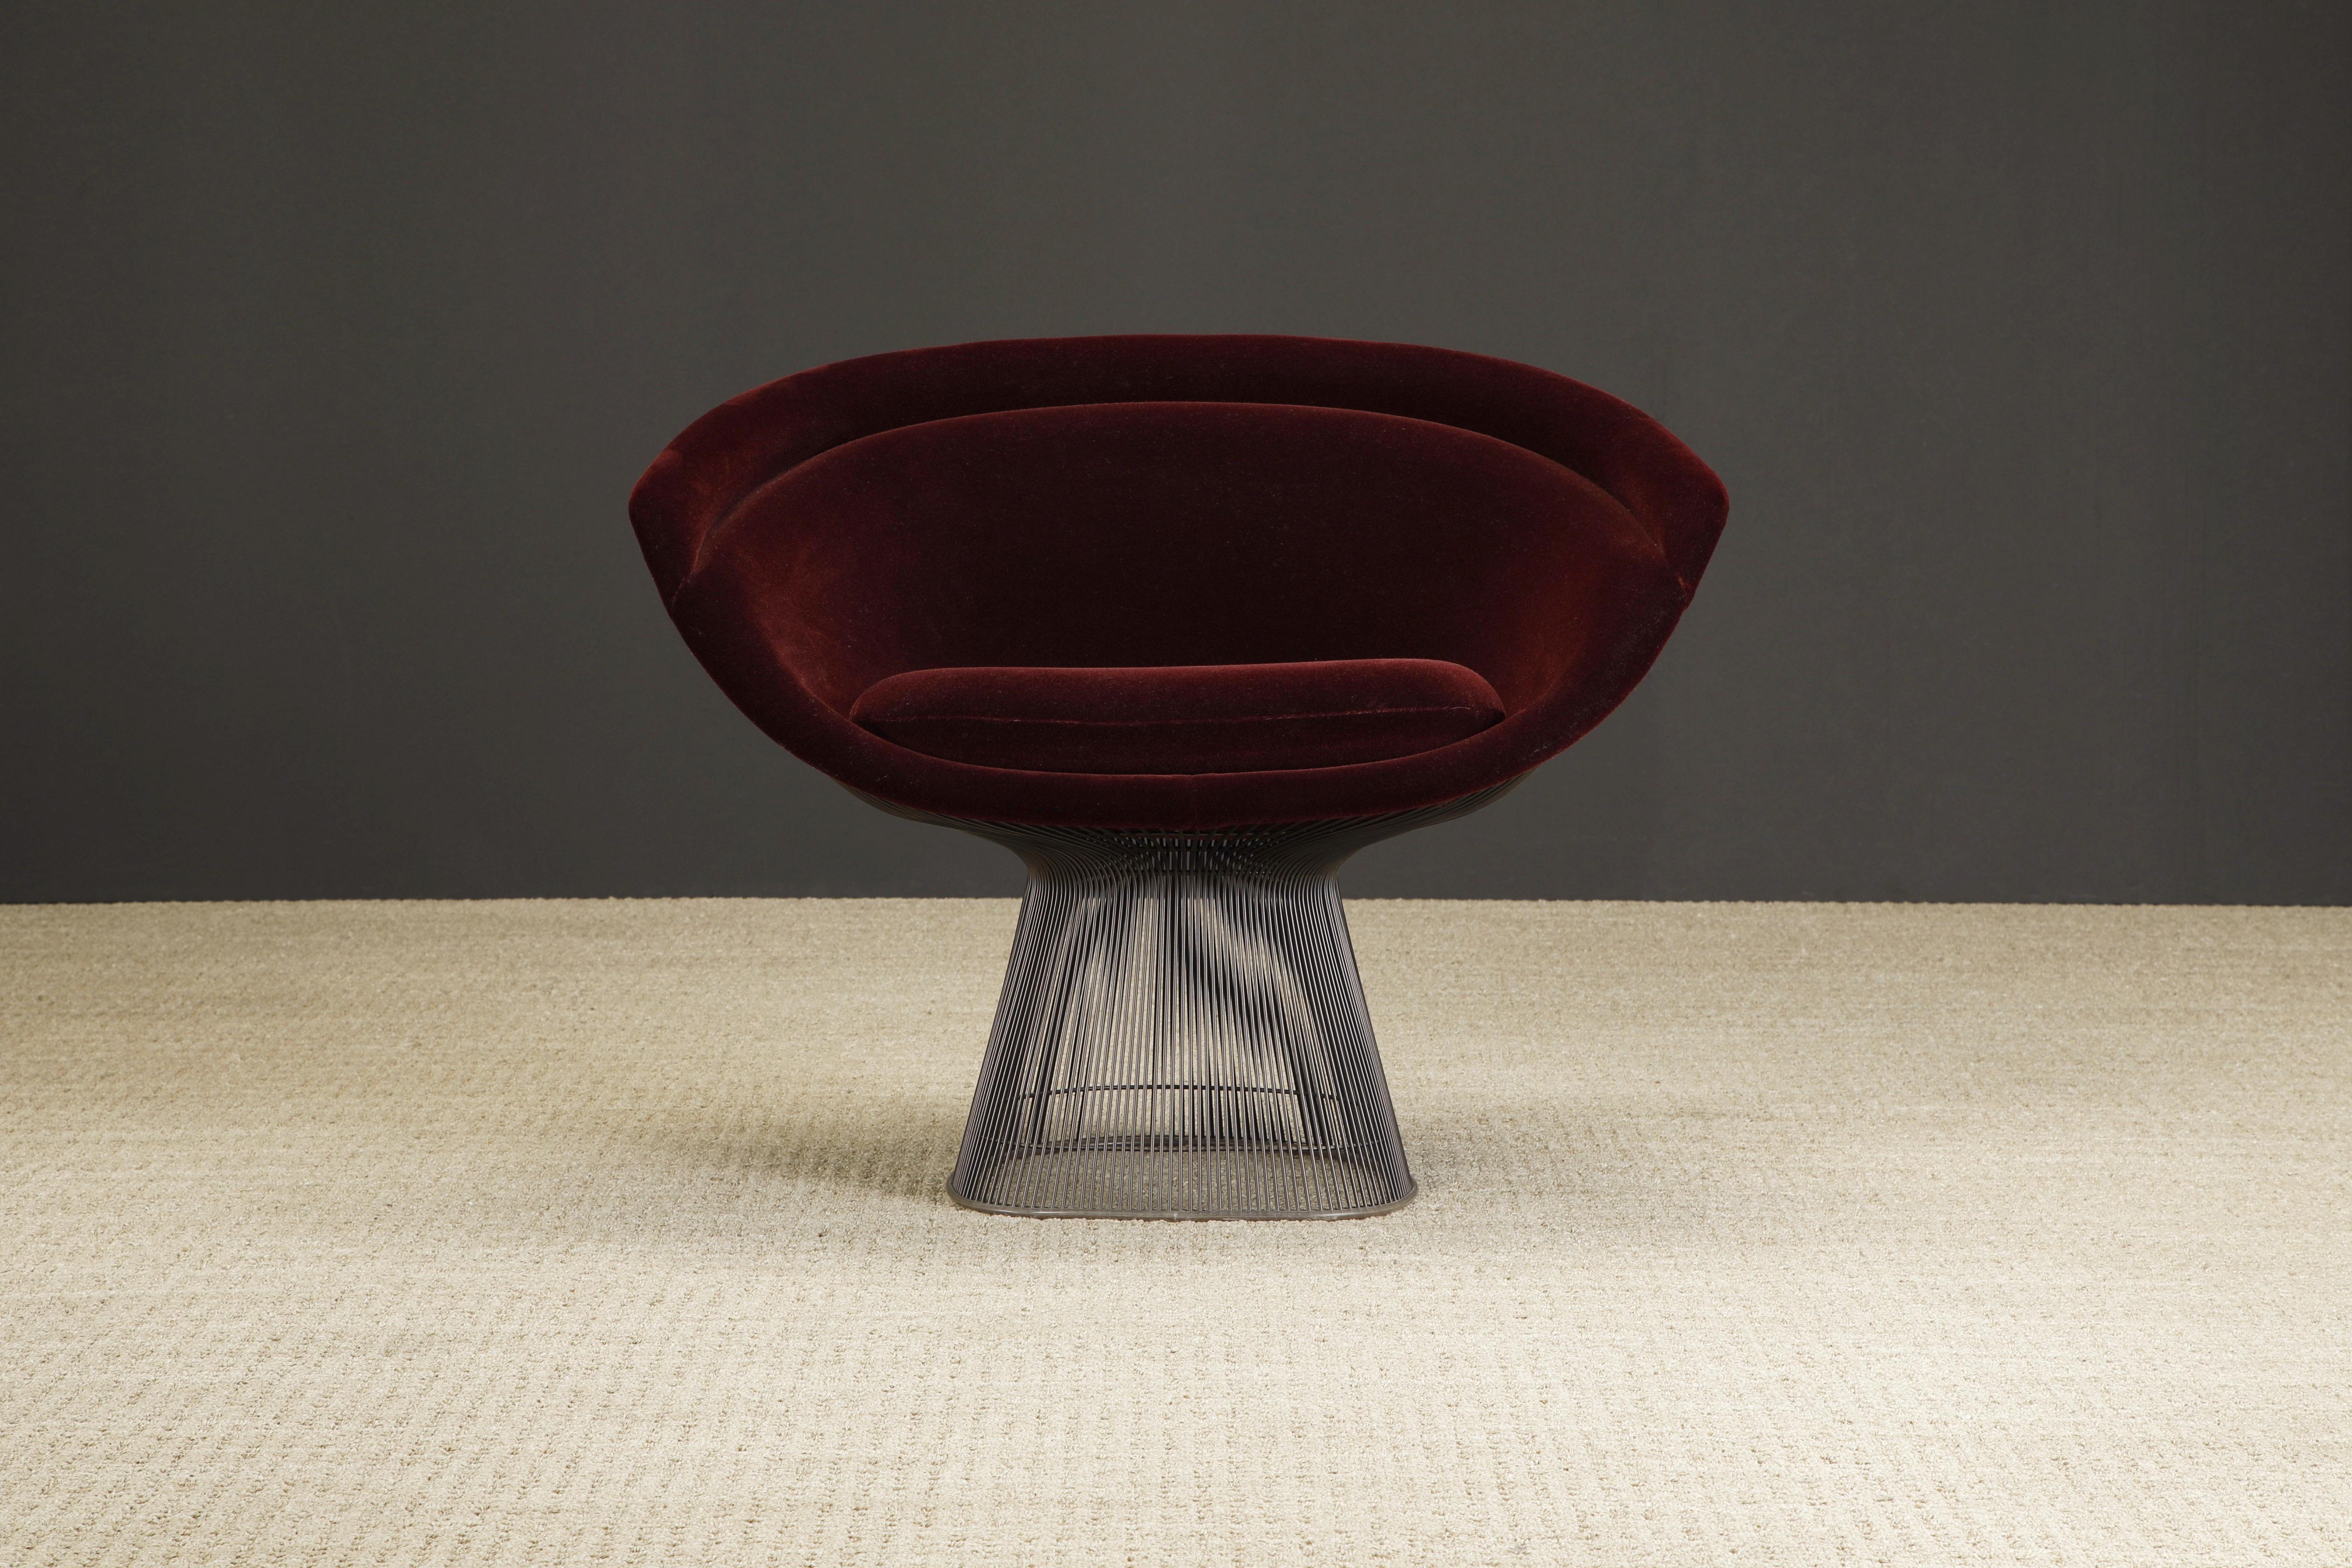 A beautiful Warren Platner for Knoll lounge chair (Model 1715L), upholstered in a gorgeous burgundy (wine) color velvet fabric over a bronze finish frame. 

The deep burgundy velvet is a luxurious upgrade over the standard knit fabric that is more